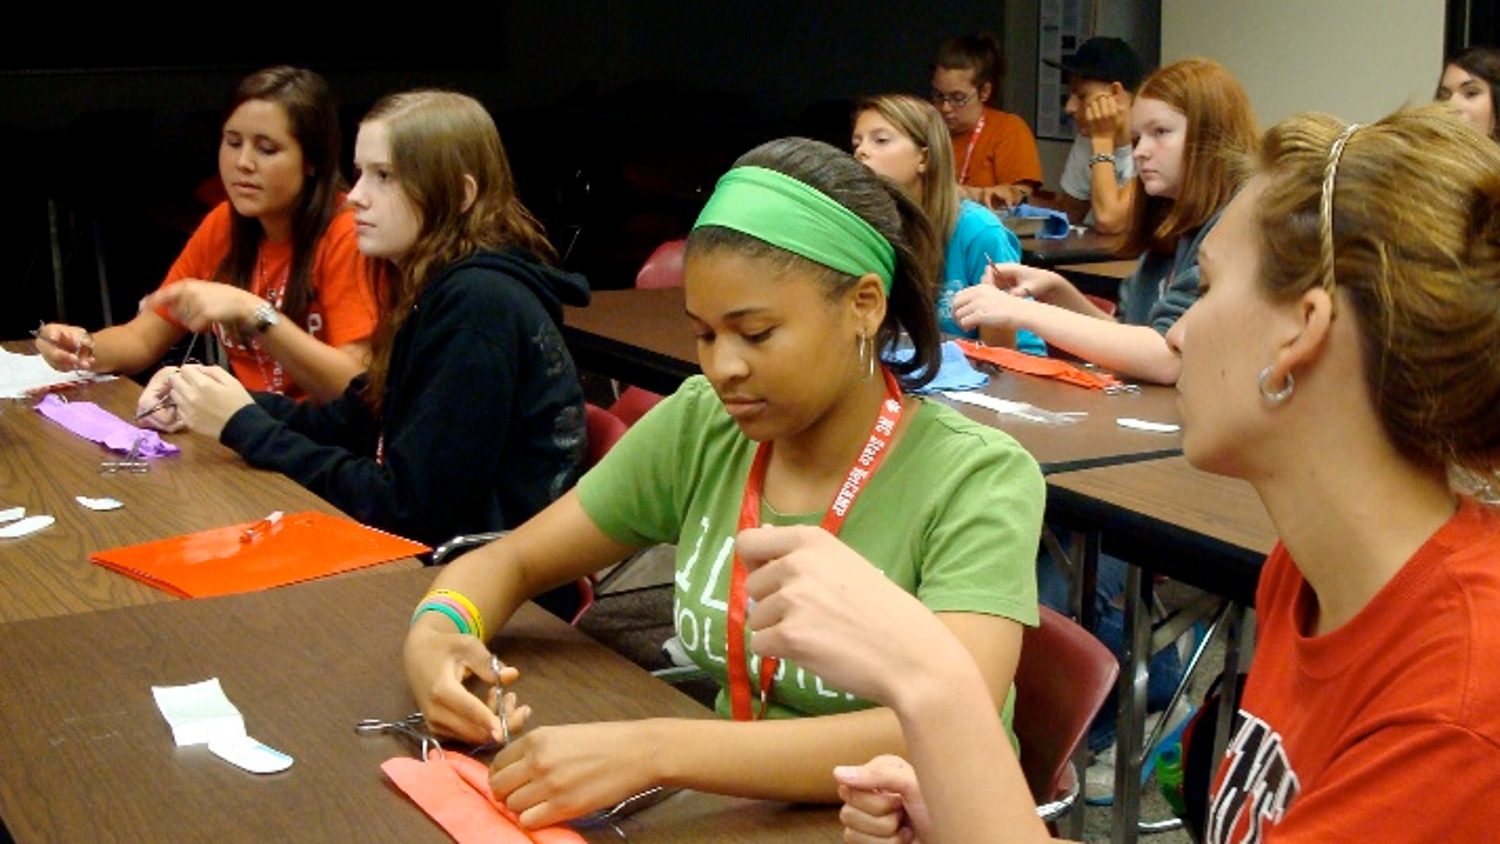 Campers get acquainted with the tools needed for stitching up sutures.